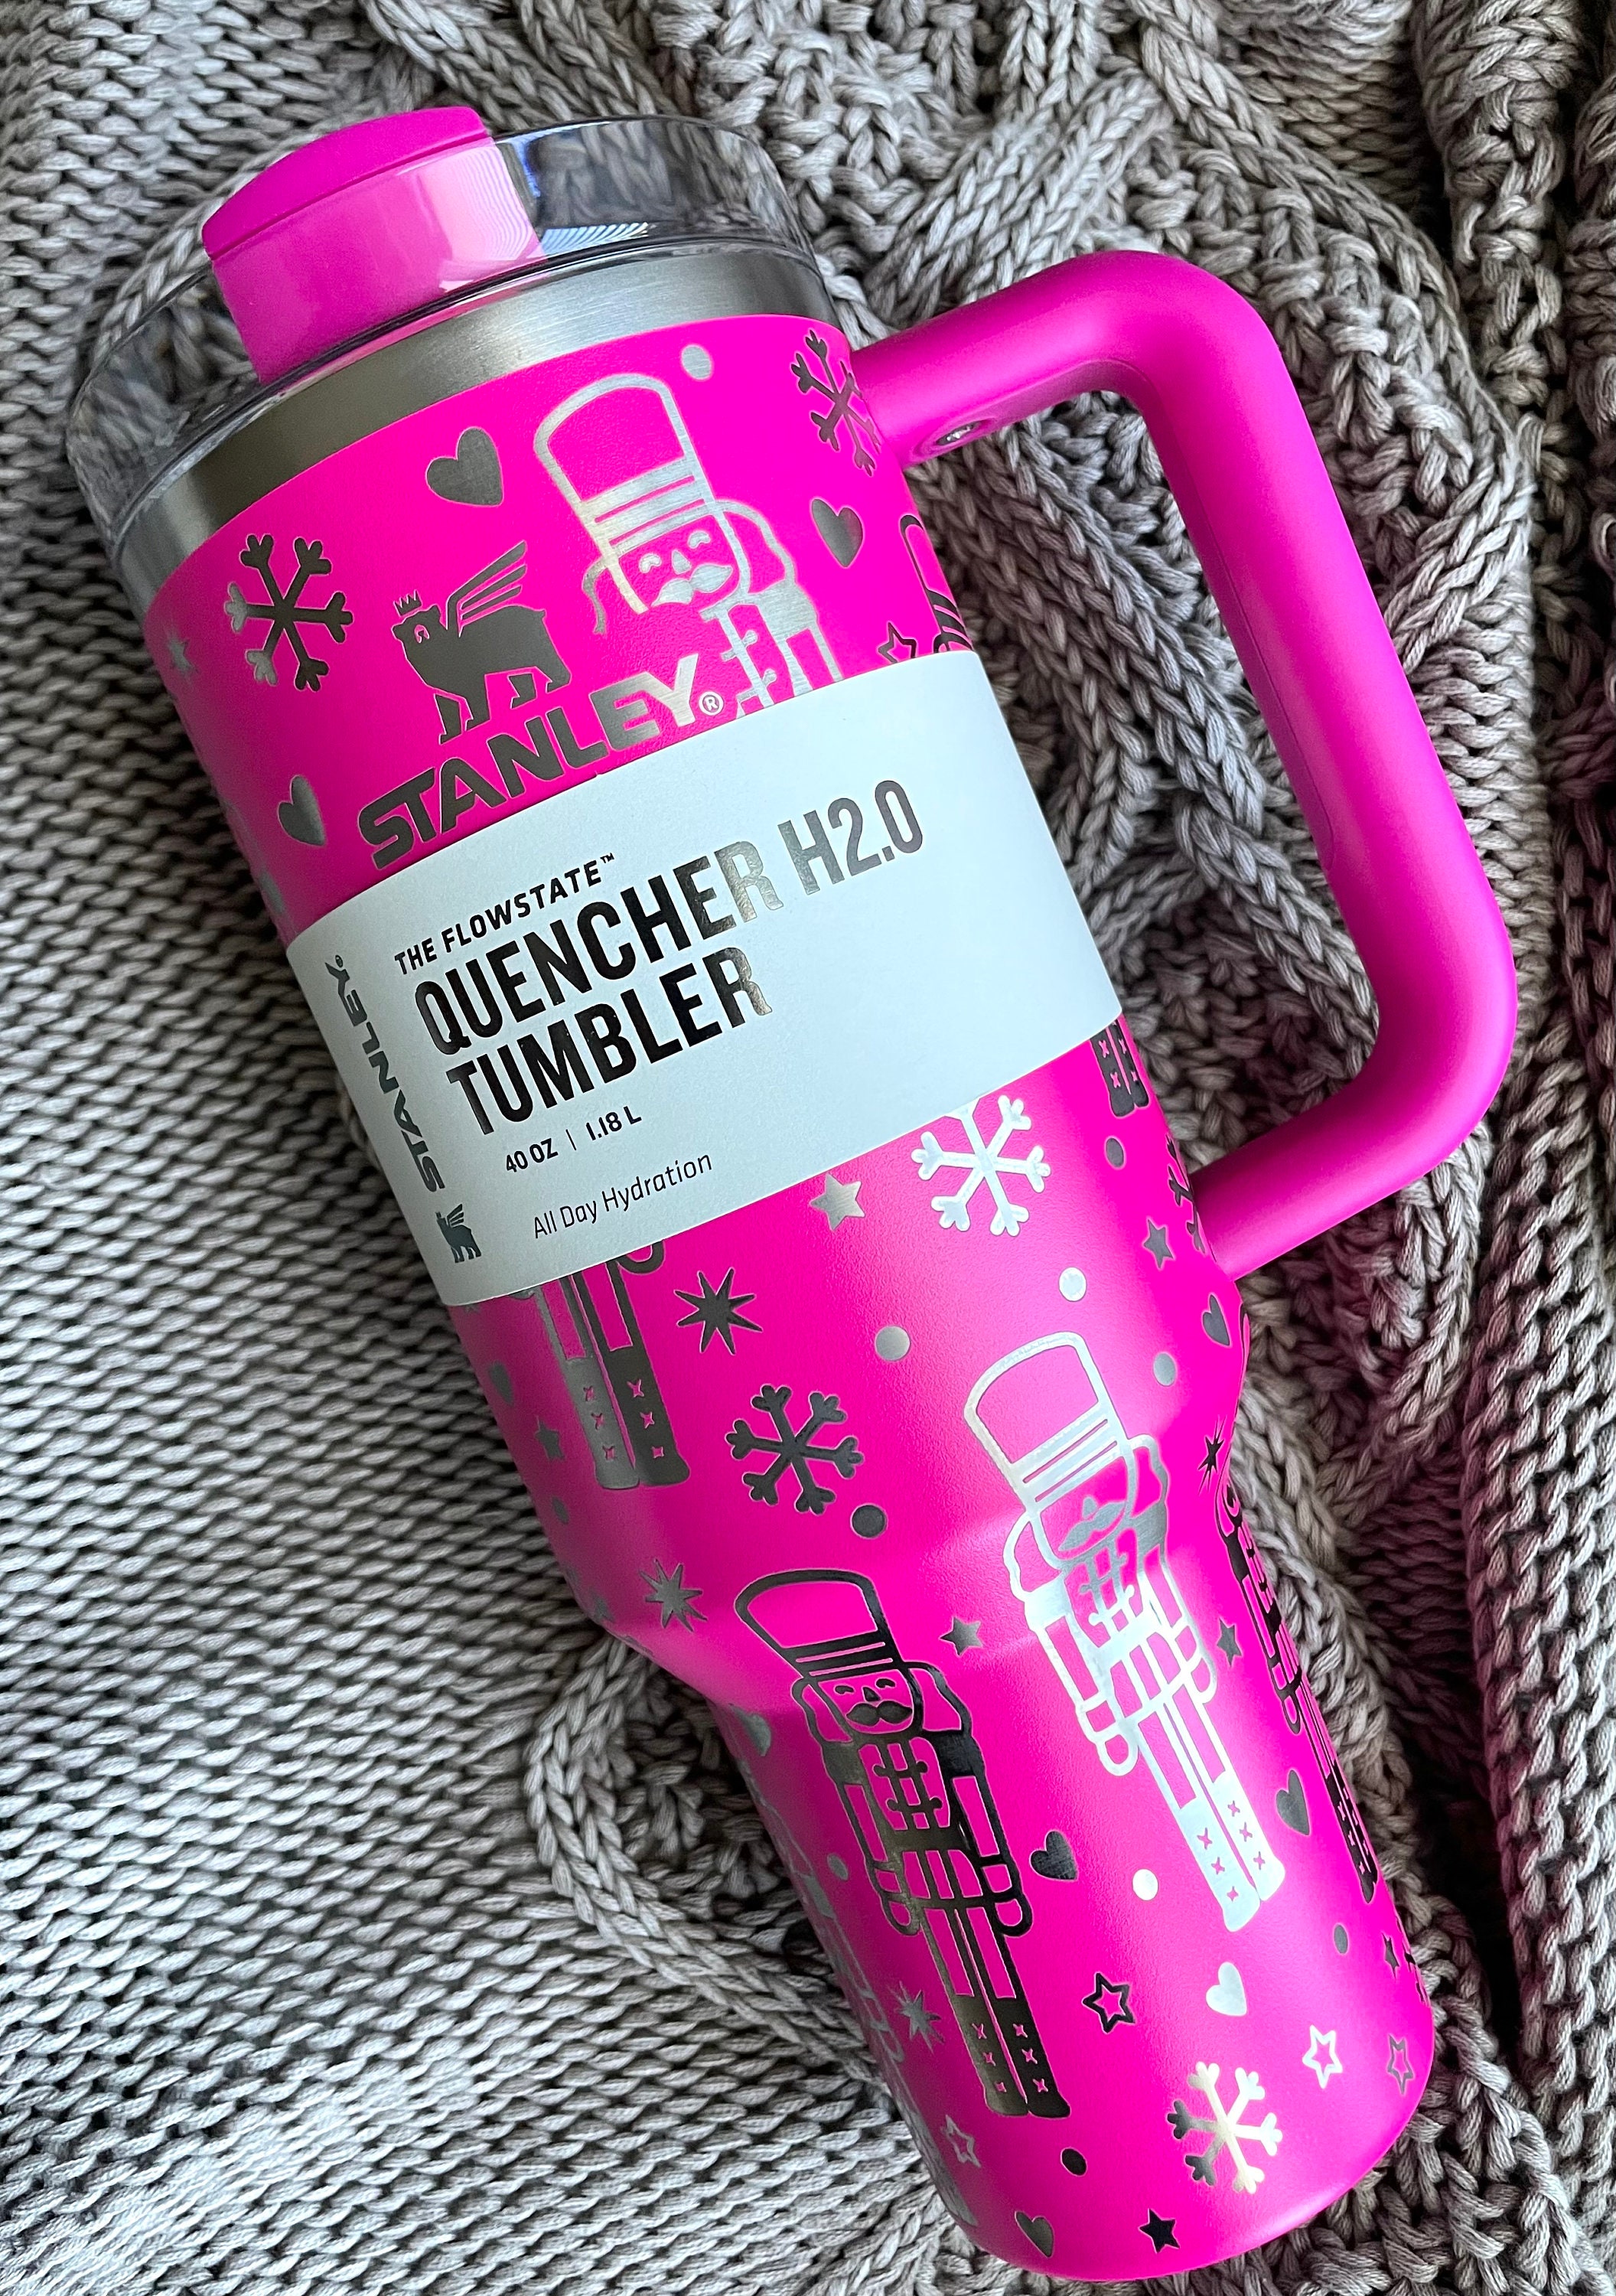 Stanley Quencher Tumblers Now Come in Limited Edition Holiday Designs –  SheKnows